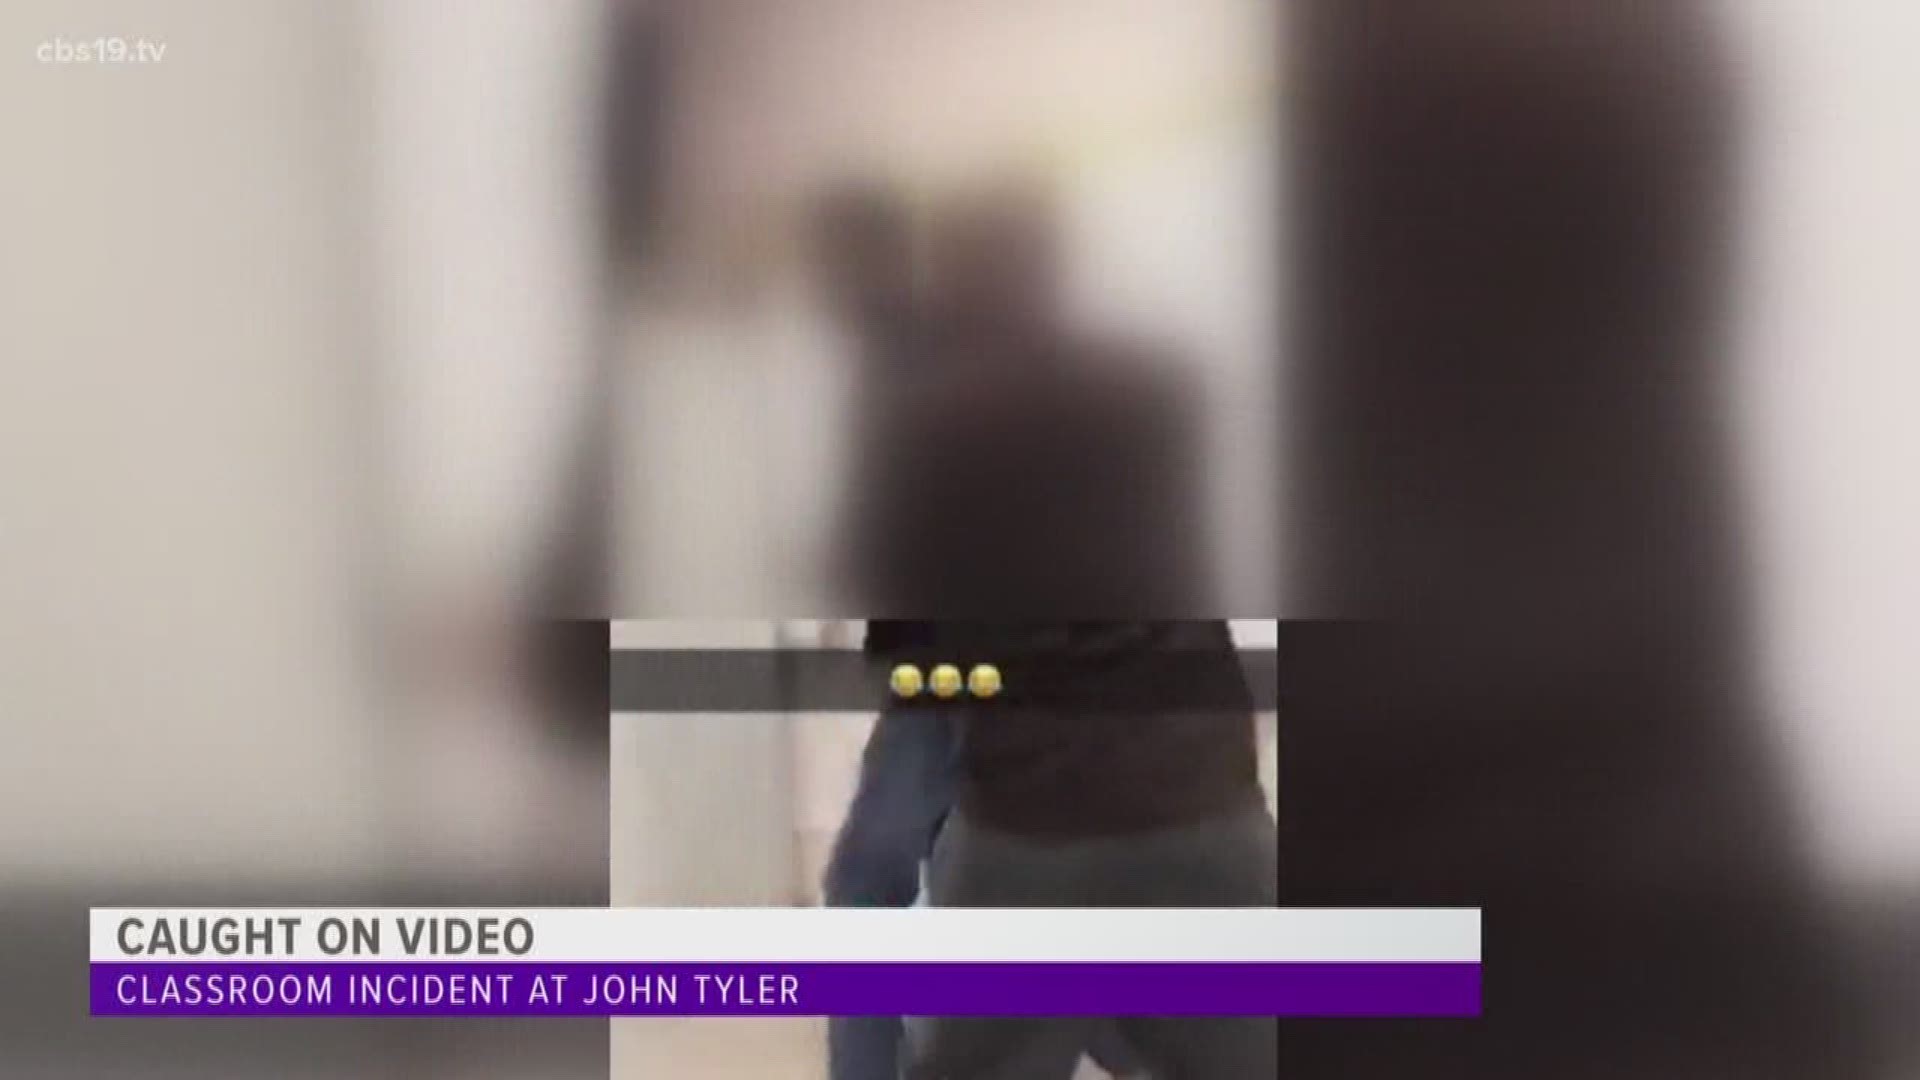  A JOHN TYLER HIGH SCHOOL TEACHER  ON ADMINISTRATIVE LEAVE AFTER A VIDEO SURFACED SHOWING HIM PUSHING  A STUDENT.